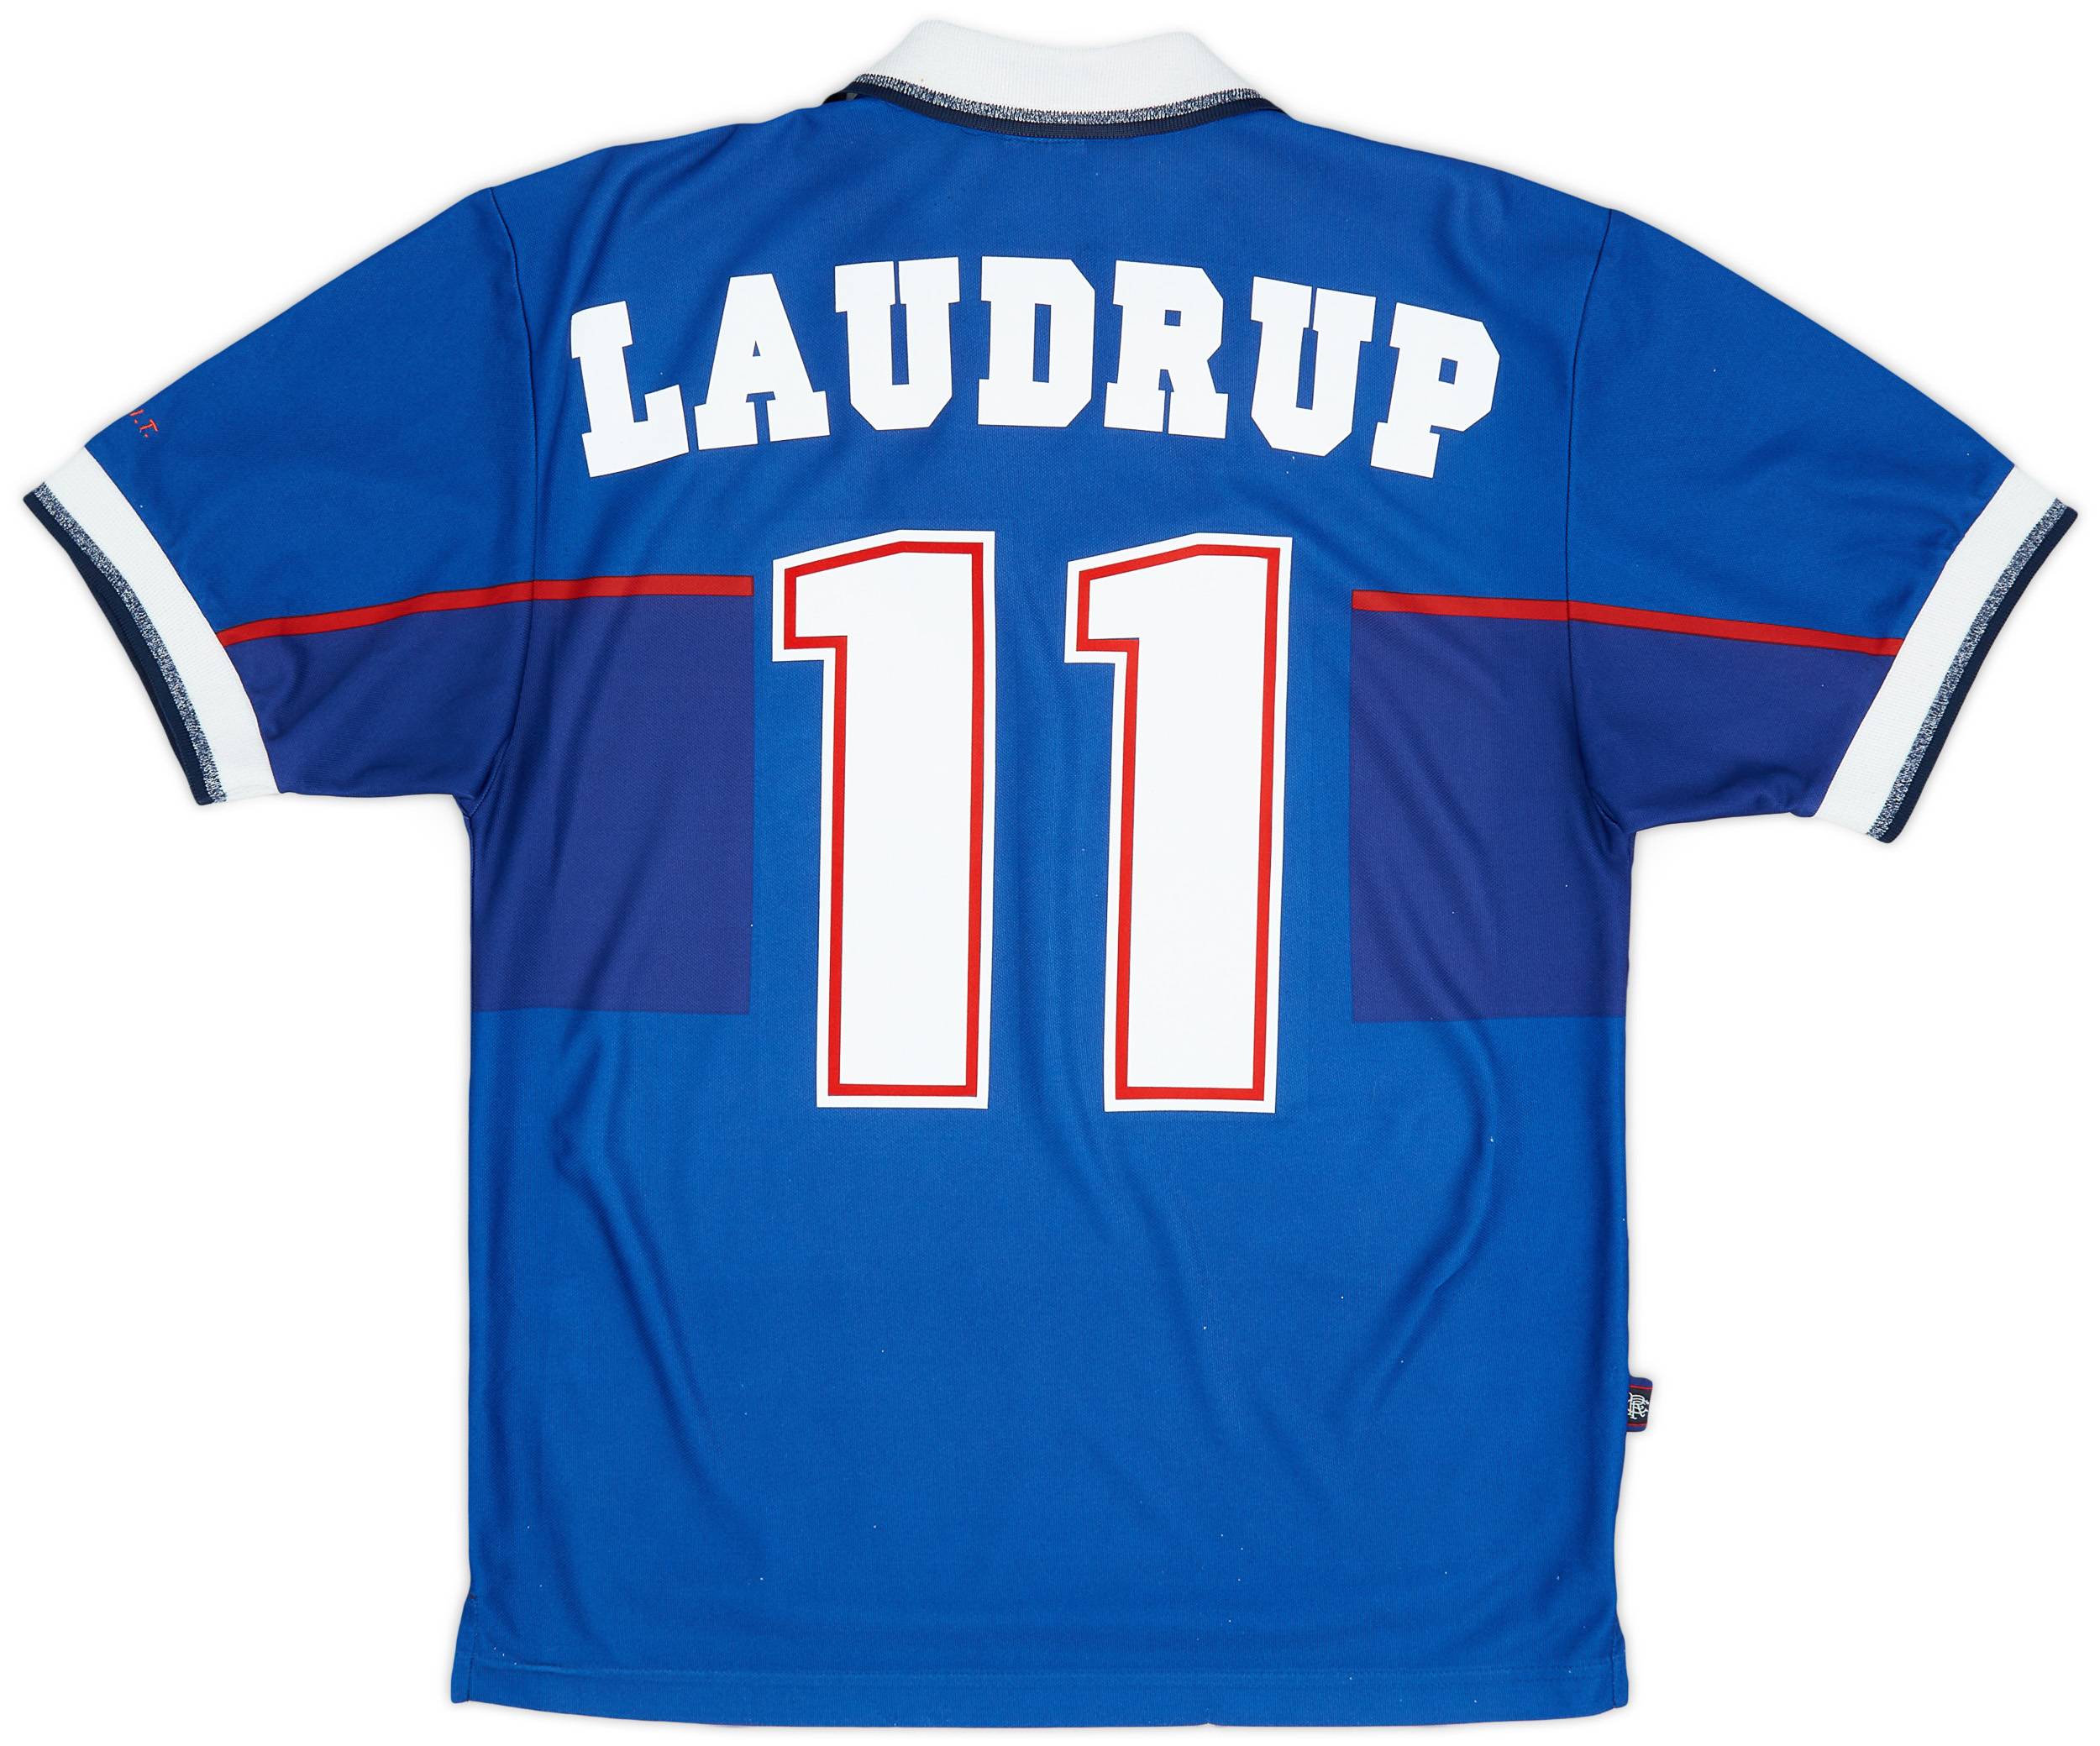 1997-99 Rangers Home Shirt Laudrup #11 - 8/10 - (S)